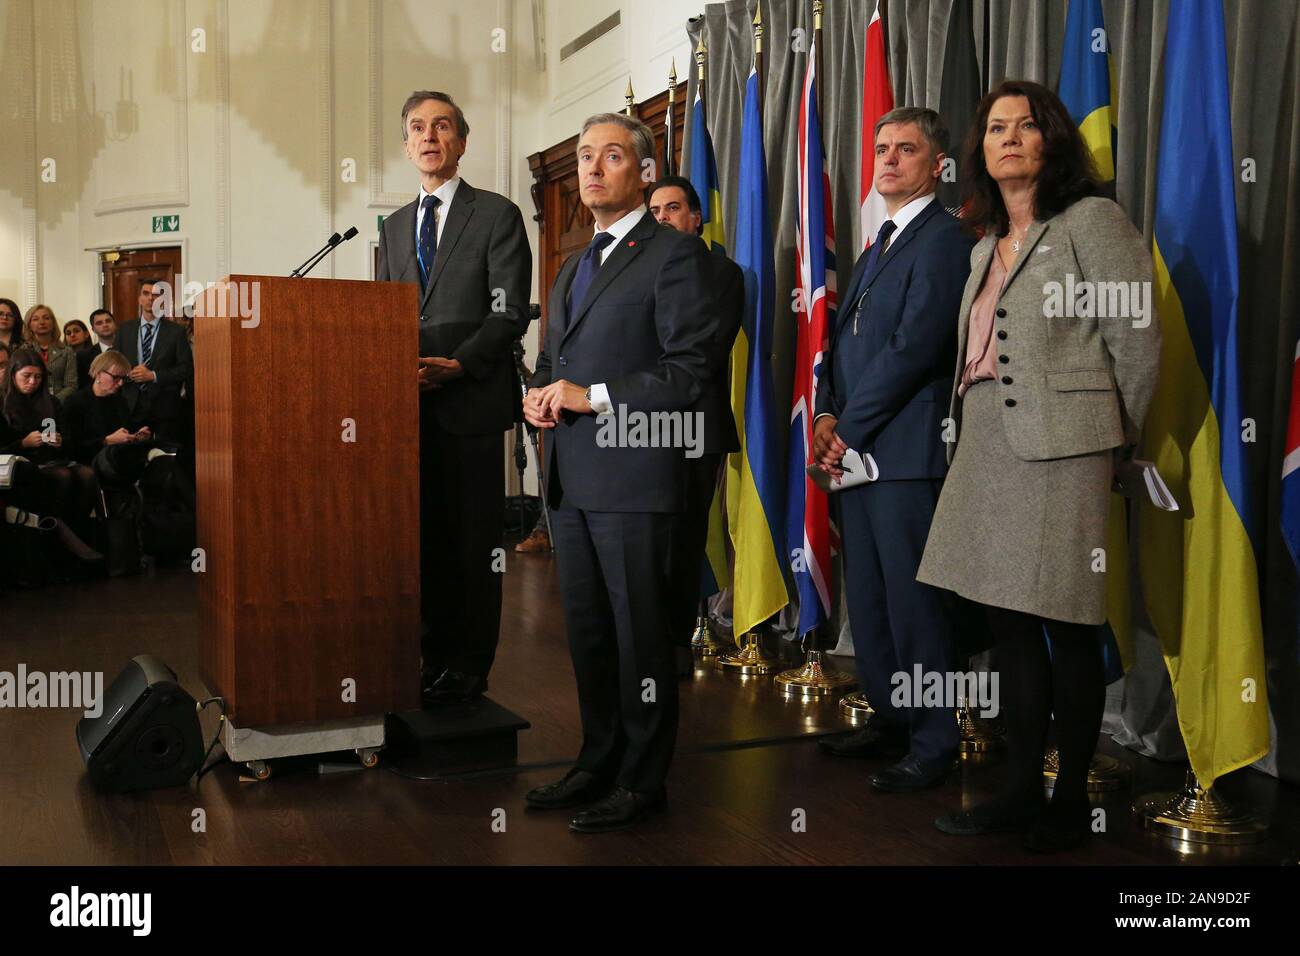 (Left to right) Dr Andrew Murrison, Minister for the Middle East and North Africa, Francois-Philippe Champagne, Canadian Minister of Foreign Affairs, and Idrees Zaman, Acting Foreign Minister for Afghanistan, Vadym Prystaiko, Ukrainian Minister of Foreign Affairs, and Ann Linde, Swedish Minister of Foreign Affairs, during a meeting of the International Coordination and Response Group for the families of the victims of the Ukrainian International Airlines flight that crashed in Iran, at the High Commission of Canada in London. Stock Photo